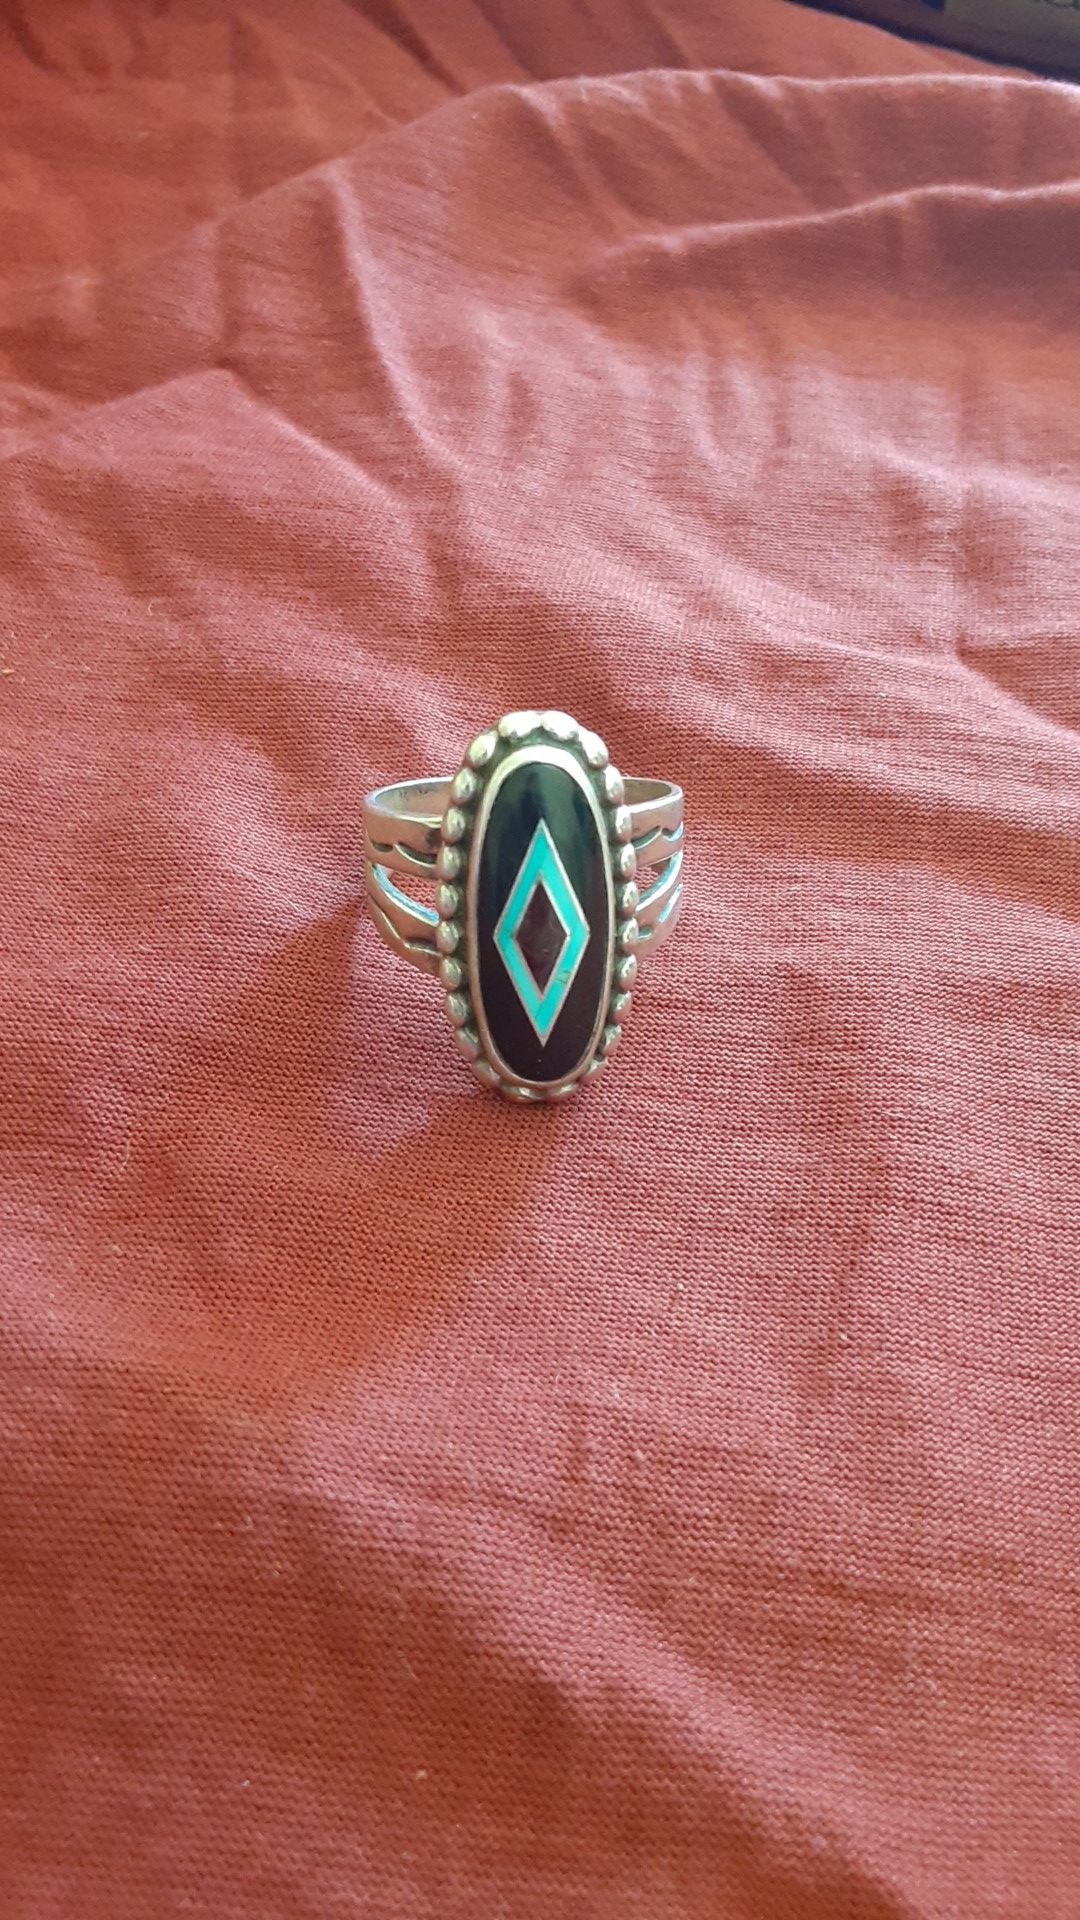 Native American designed sterling silver inlaid ring